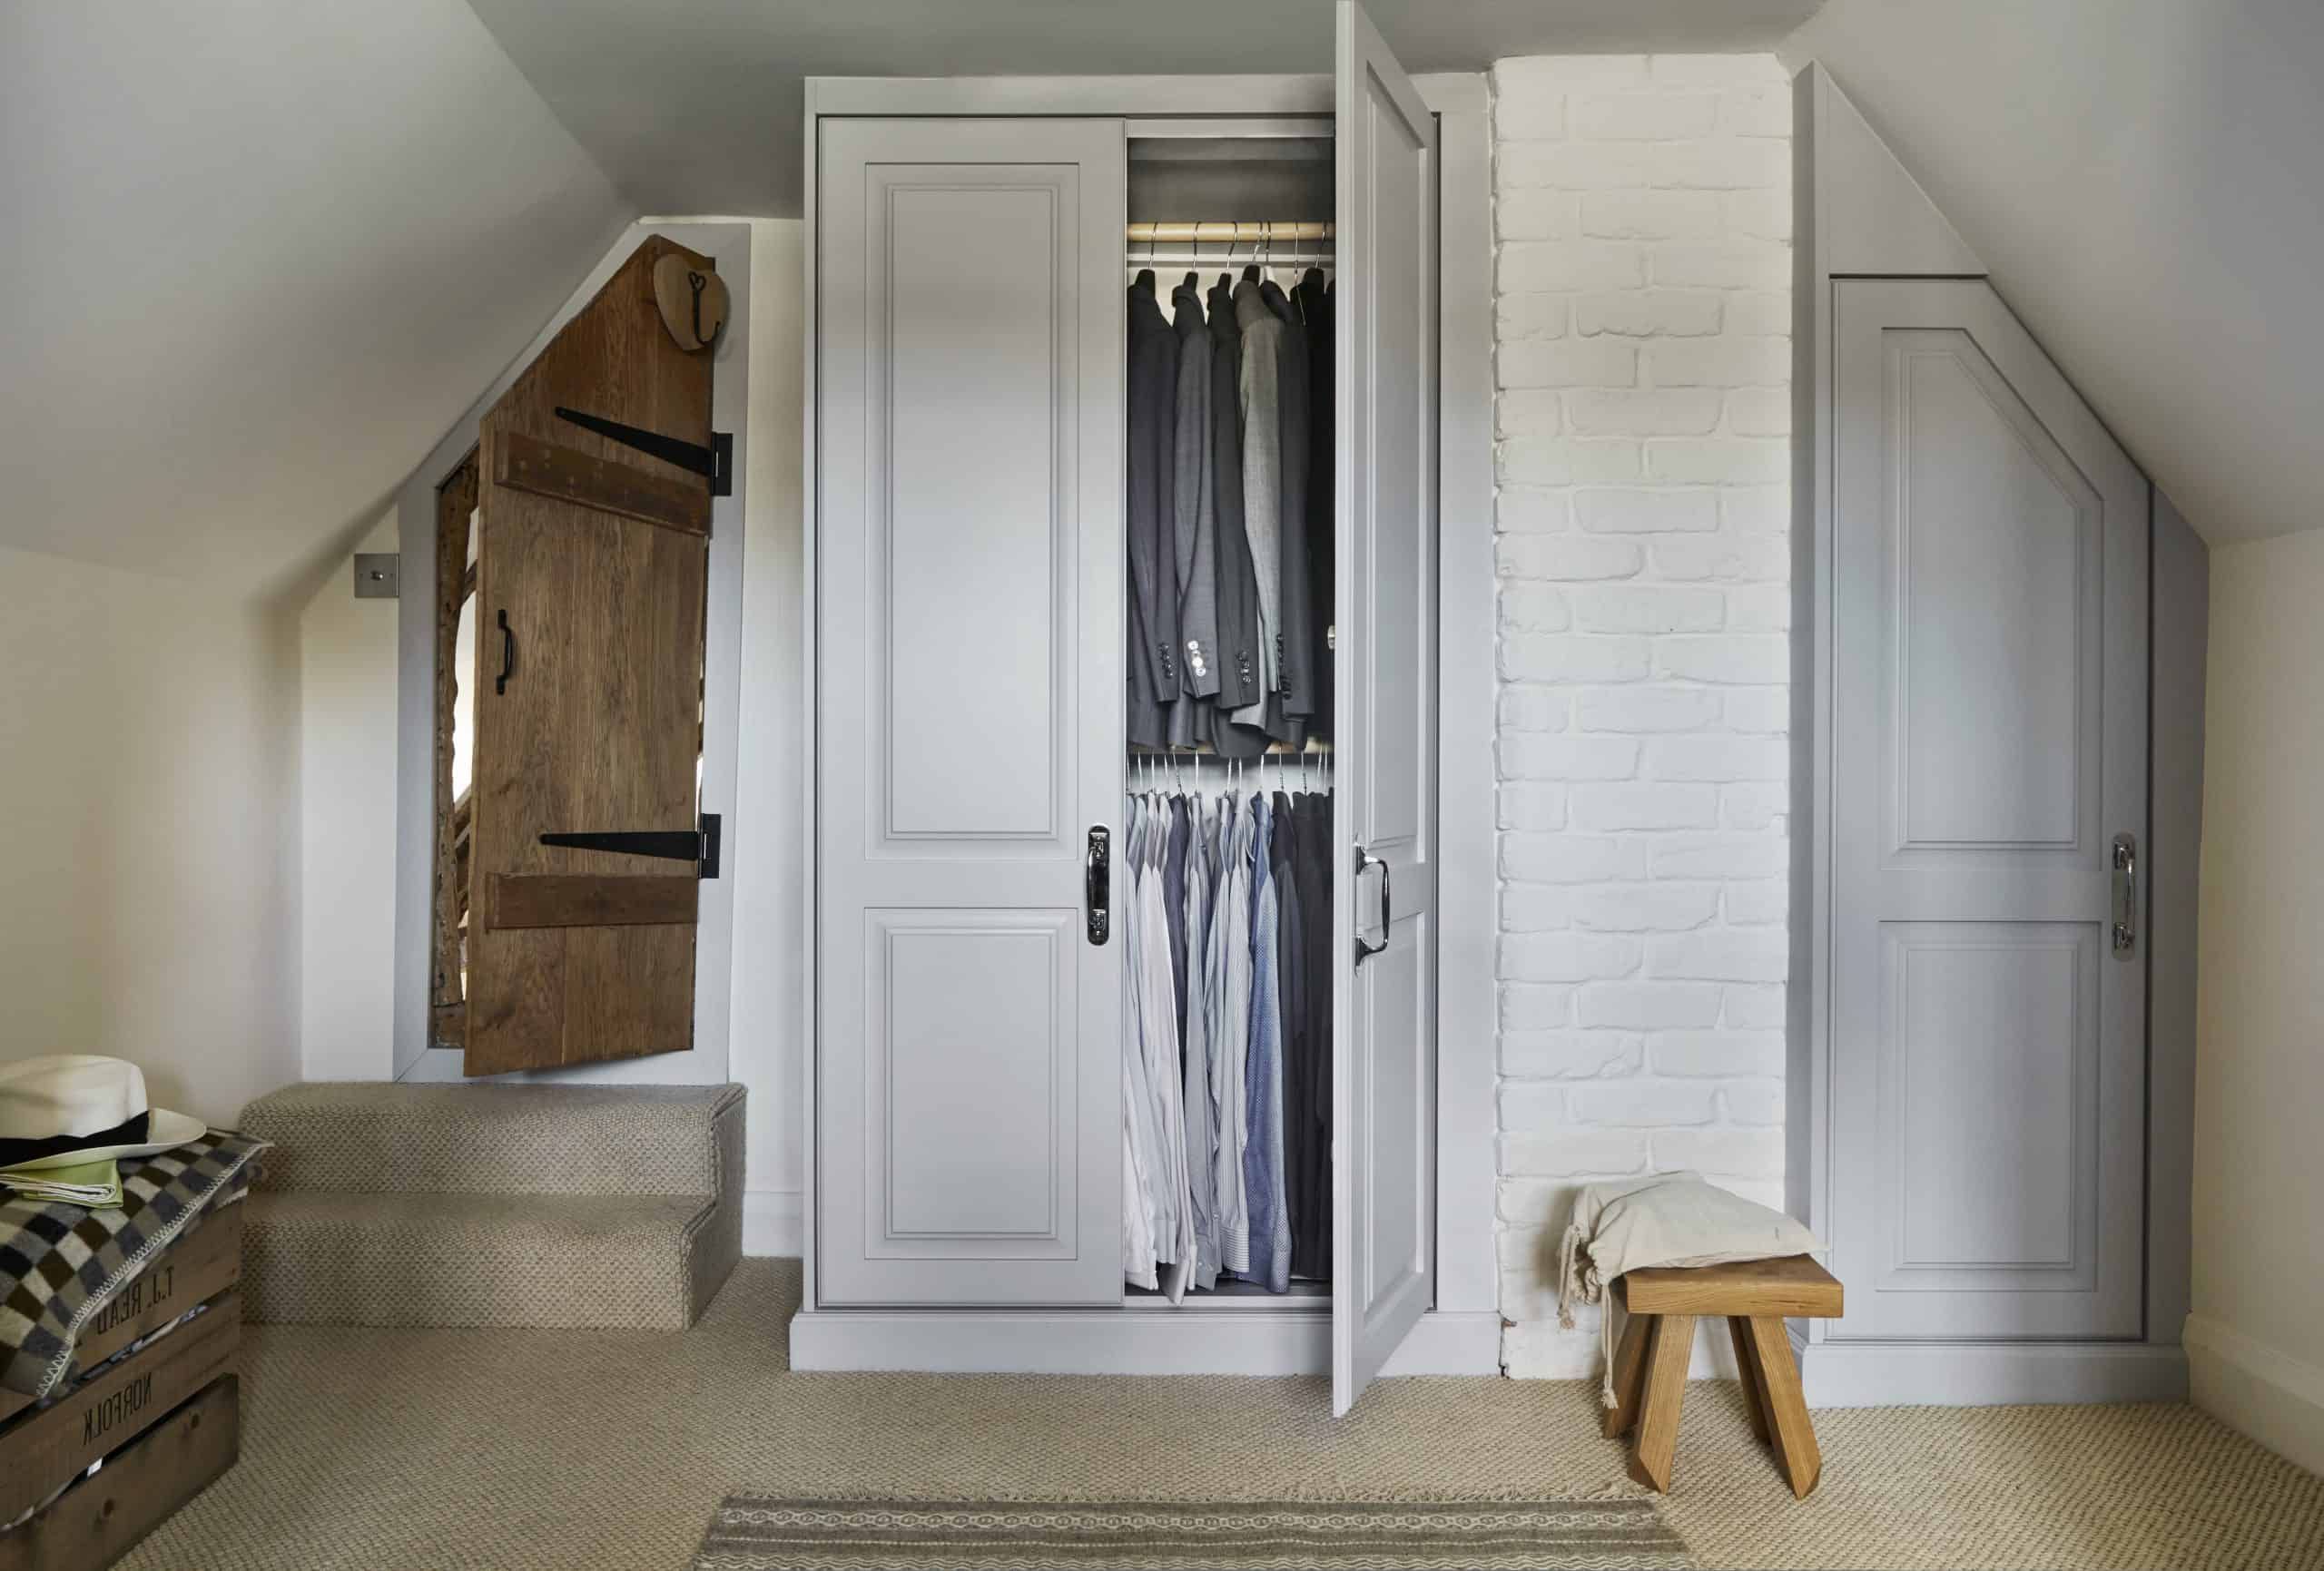 Grace In A Small Space: Small Bedroom Ideas | John Lewis Of Hungerford Within Small Wardrobes (Gallery 10 of 20)